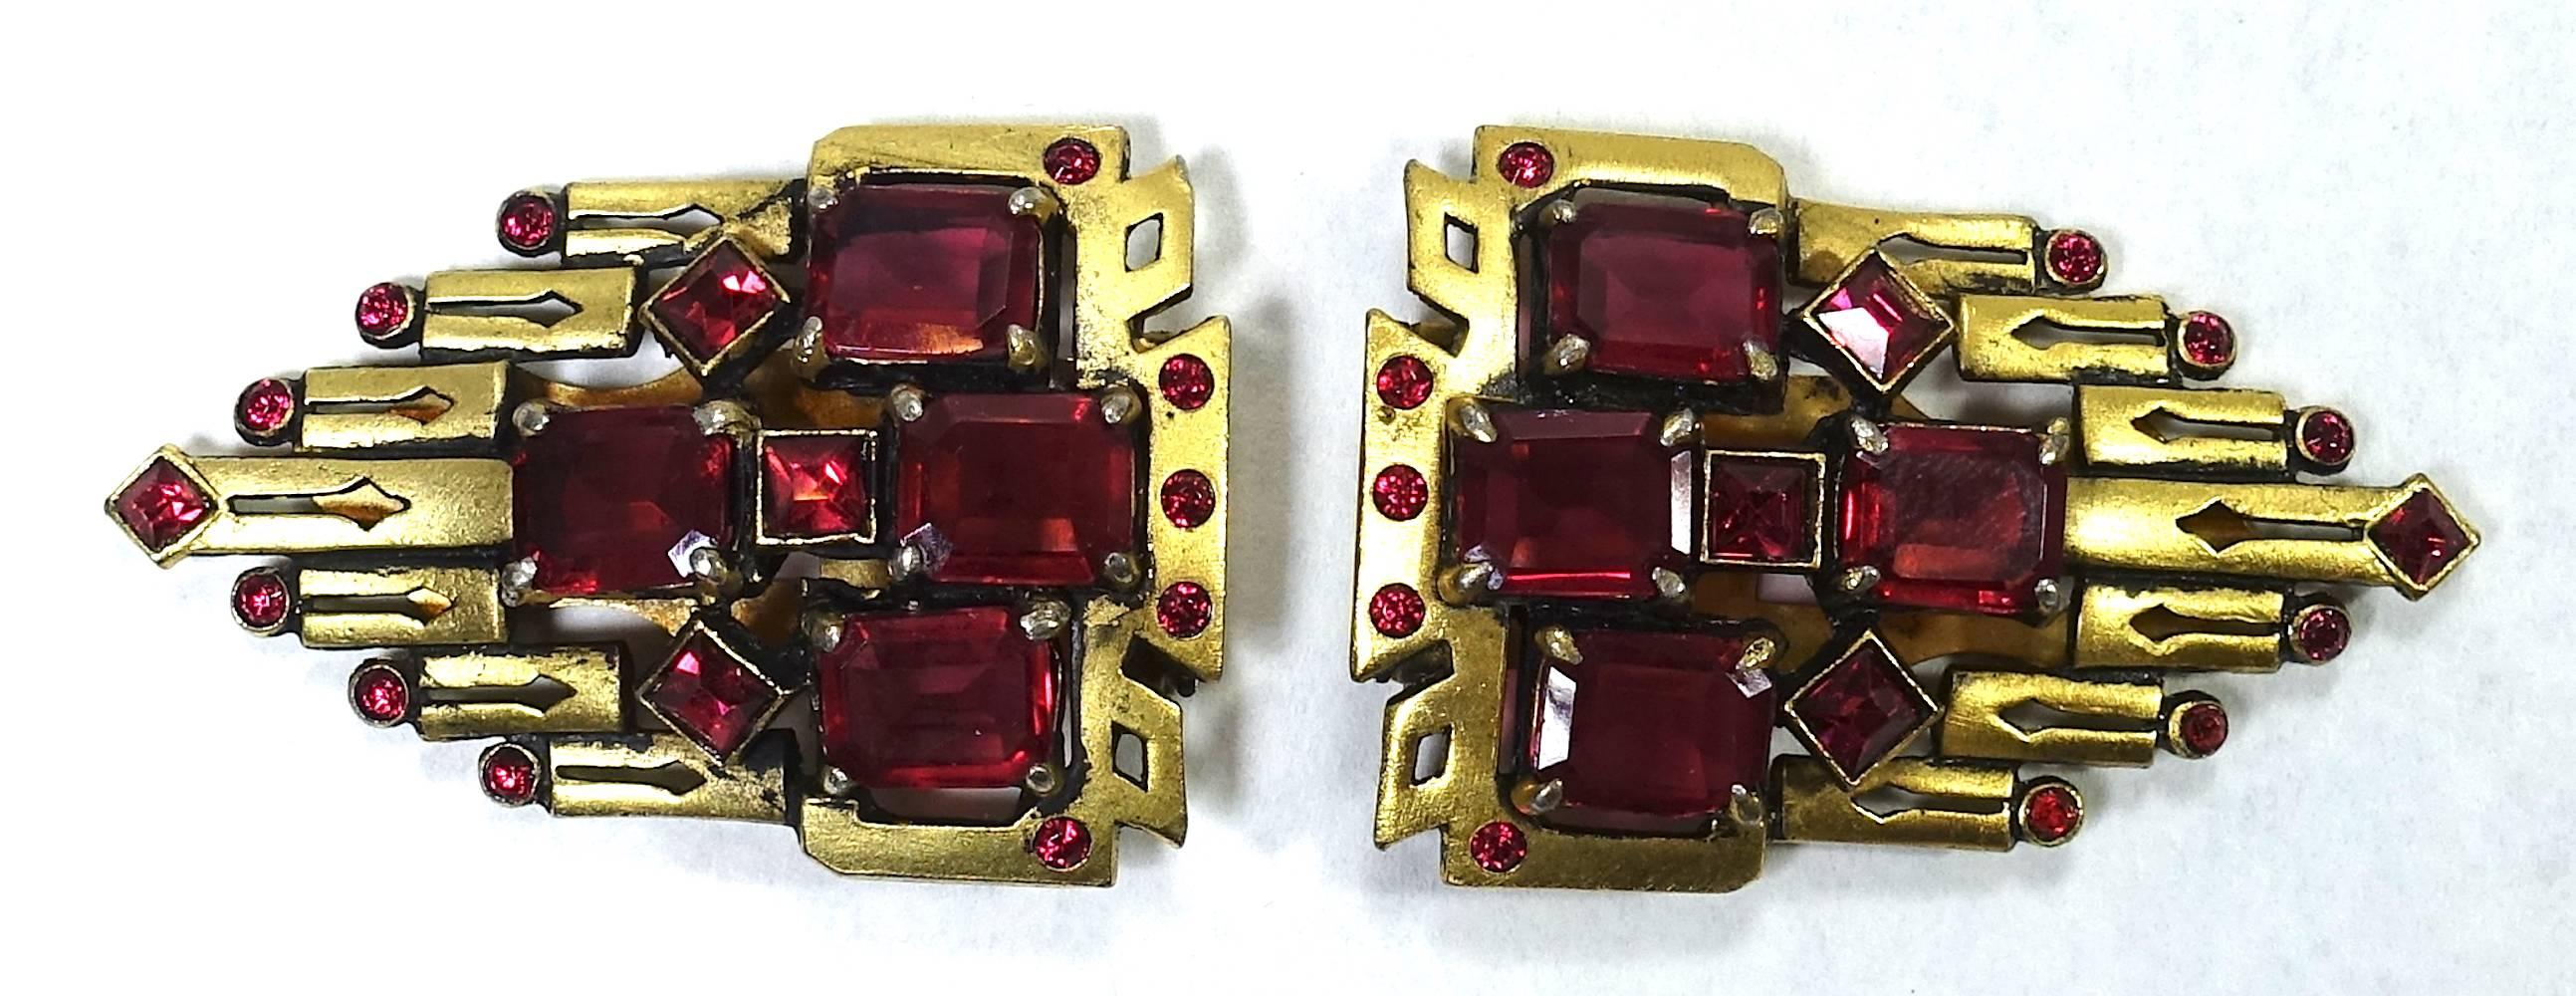 It was love at first site when I saw these fur clips. It is not often you see vintage Art Deco fur clips with not only a beauty Deco design but in such great condition.  They have a triangular shape with red rhinestones in a gold plated setting.